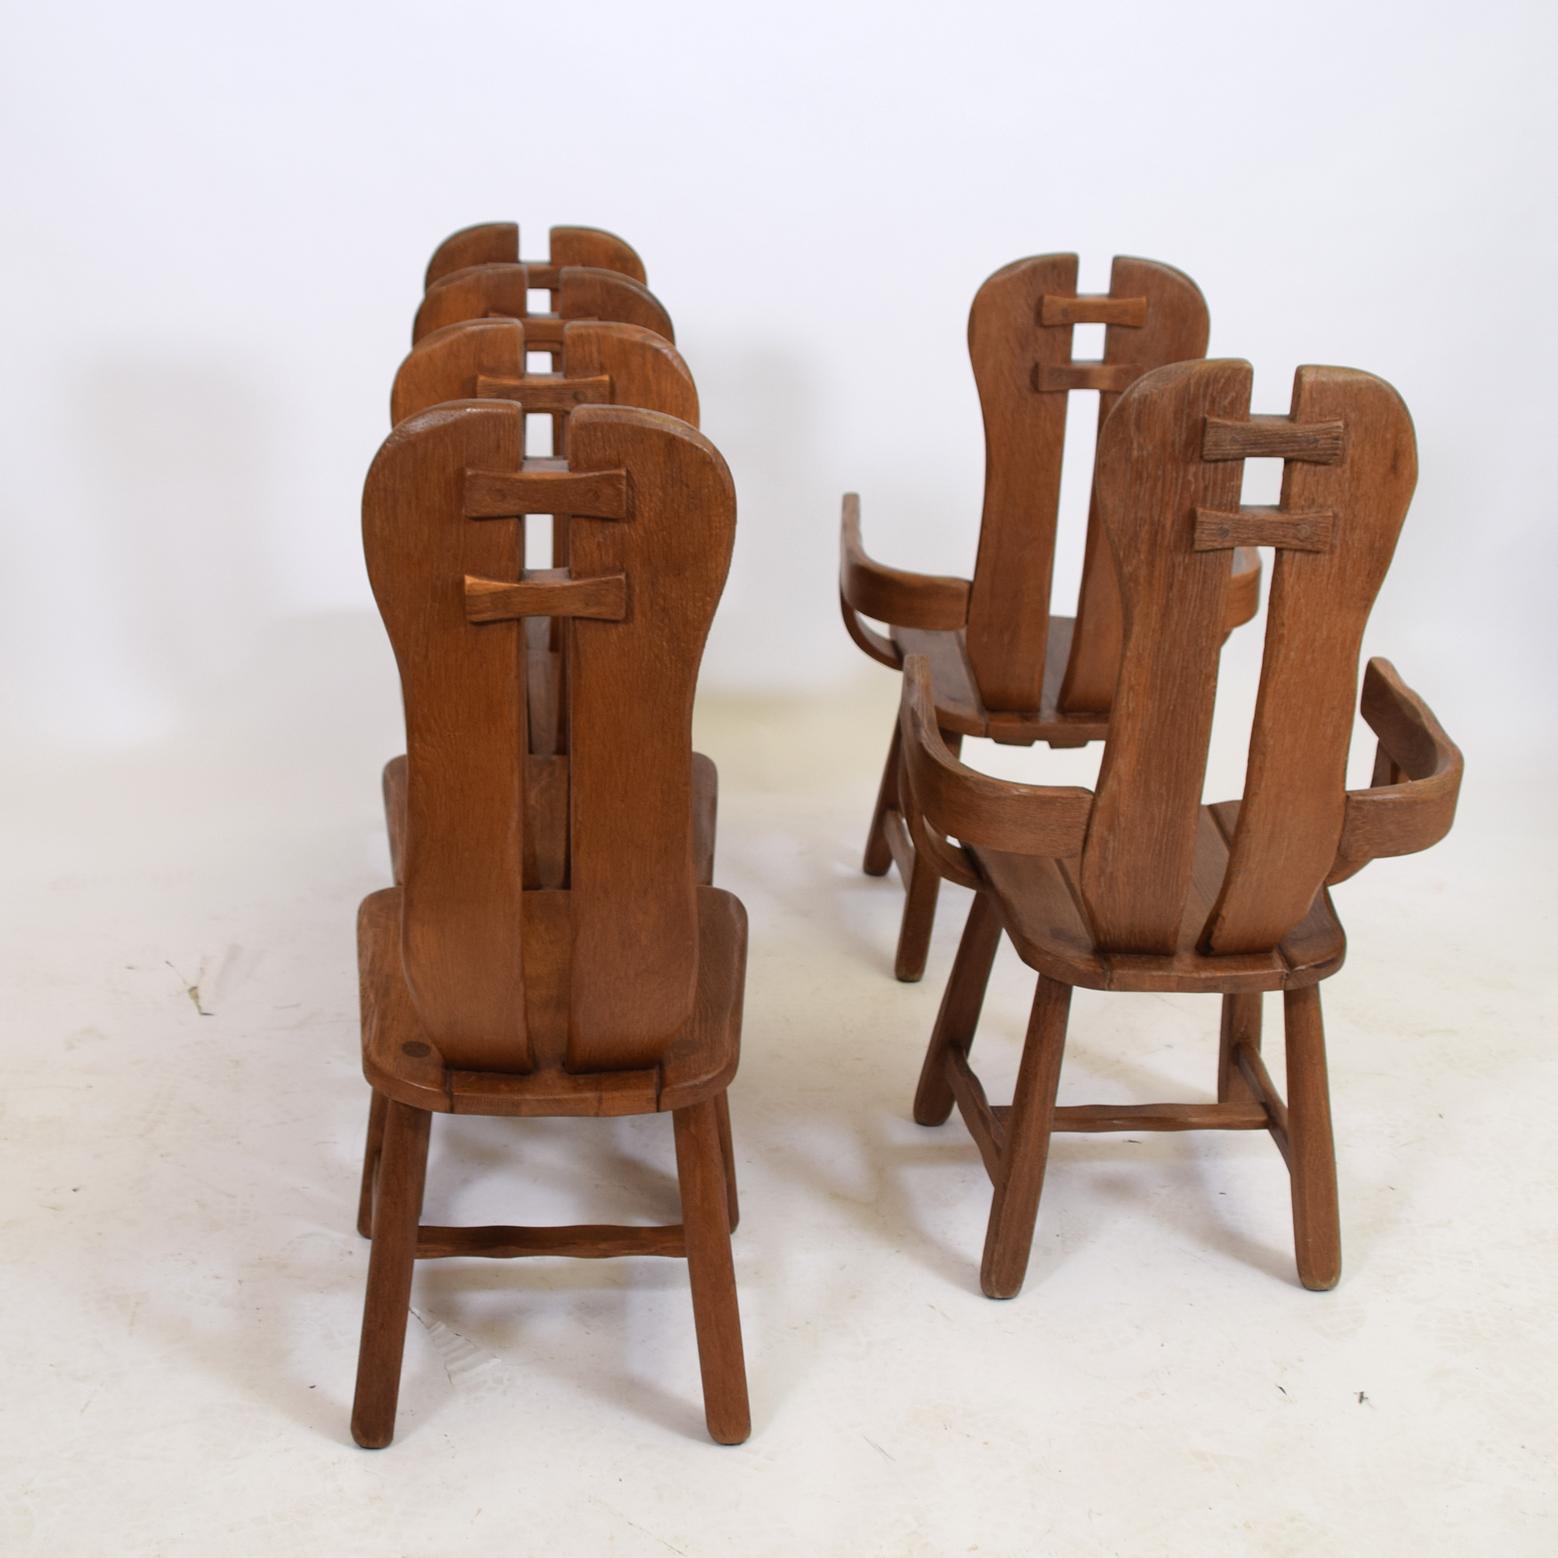 Set of 6 brutalist style oak dining chairs by designer De Puydt with tall backs, in good condition, Mid-Century Modern.